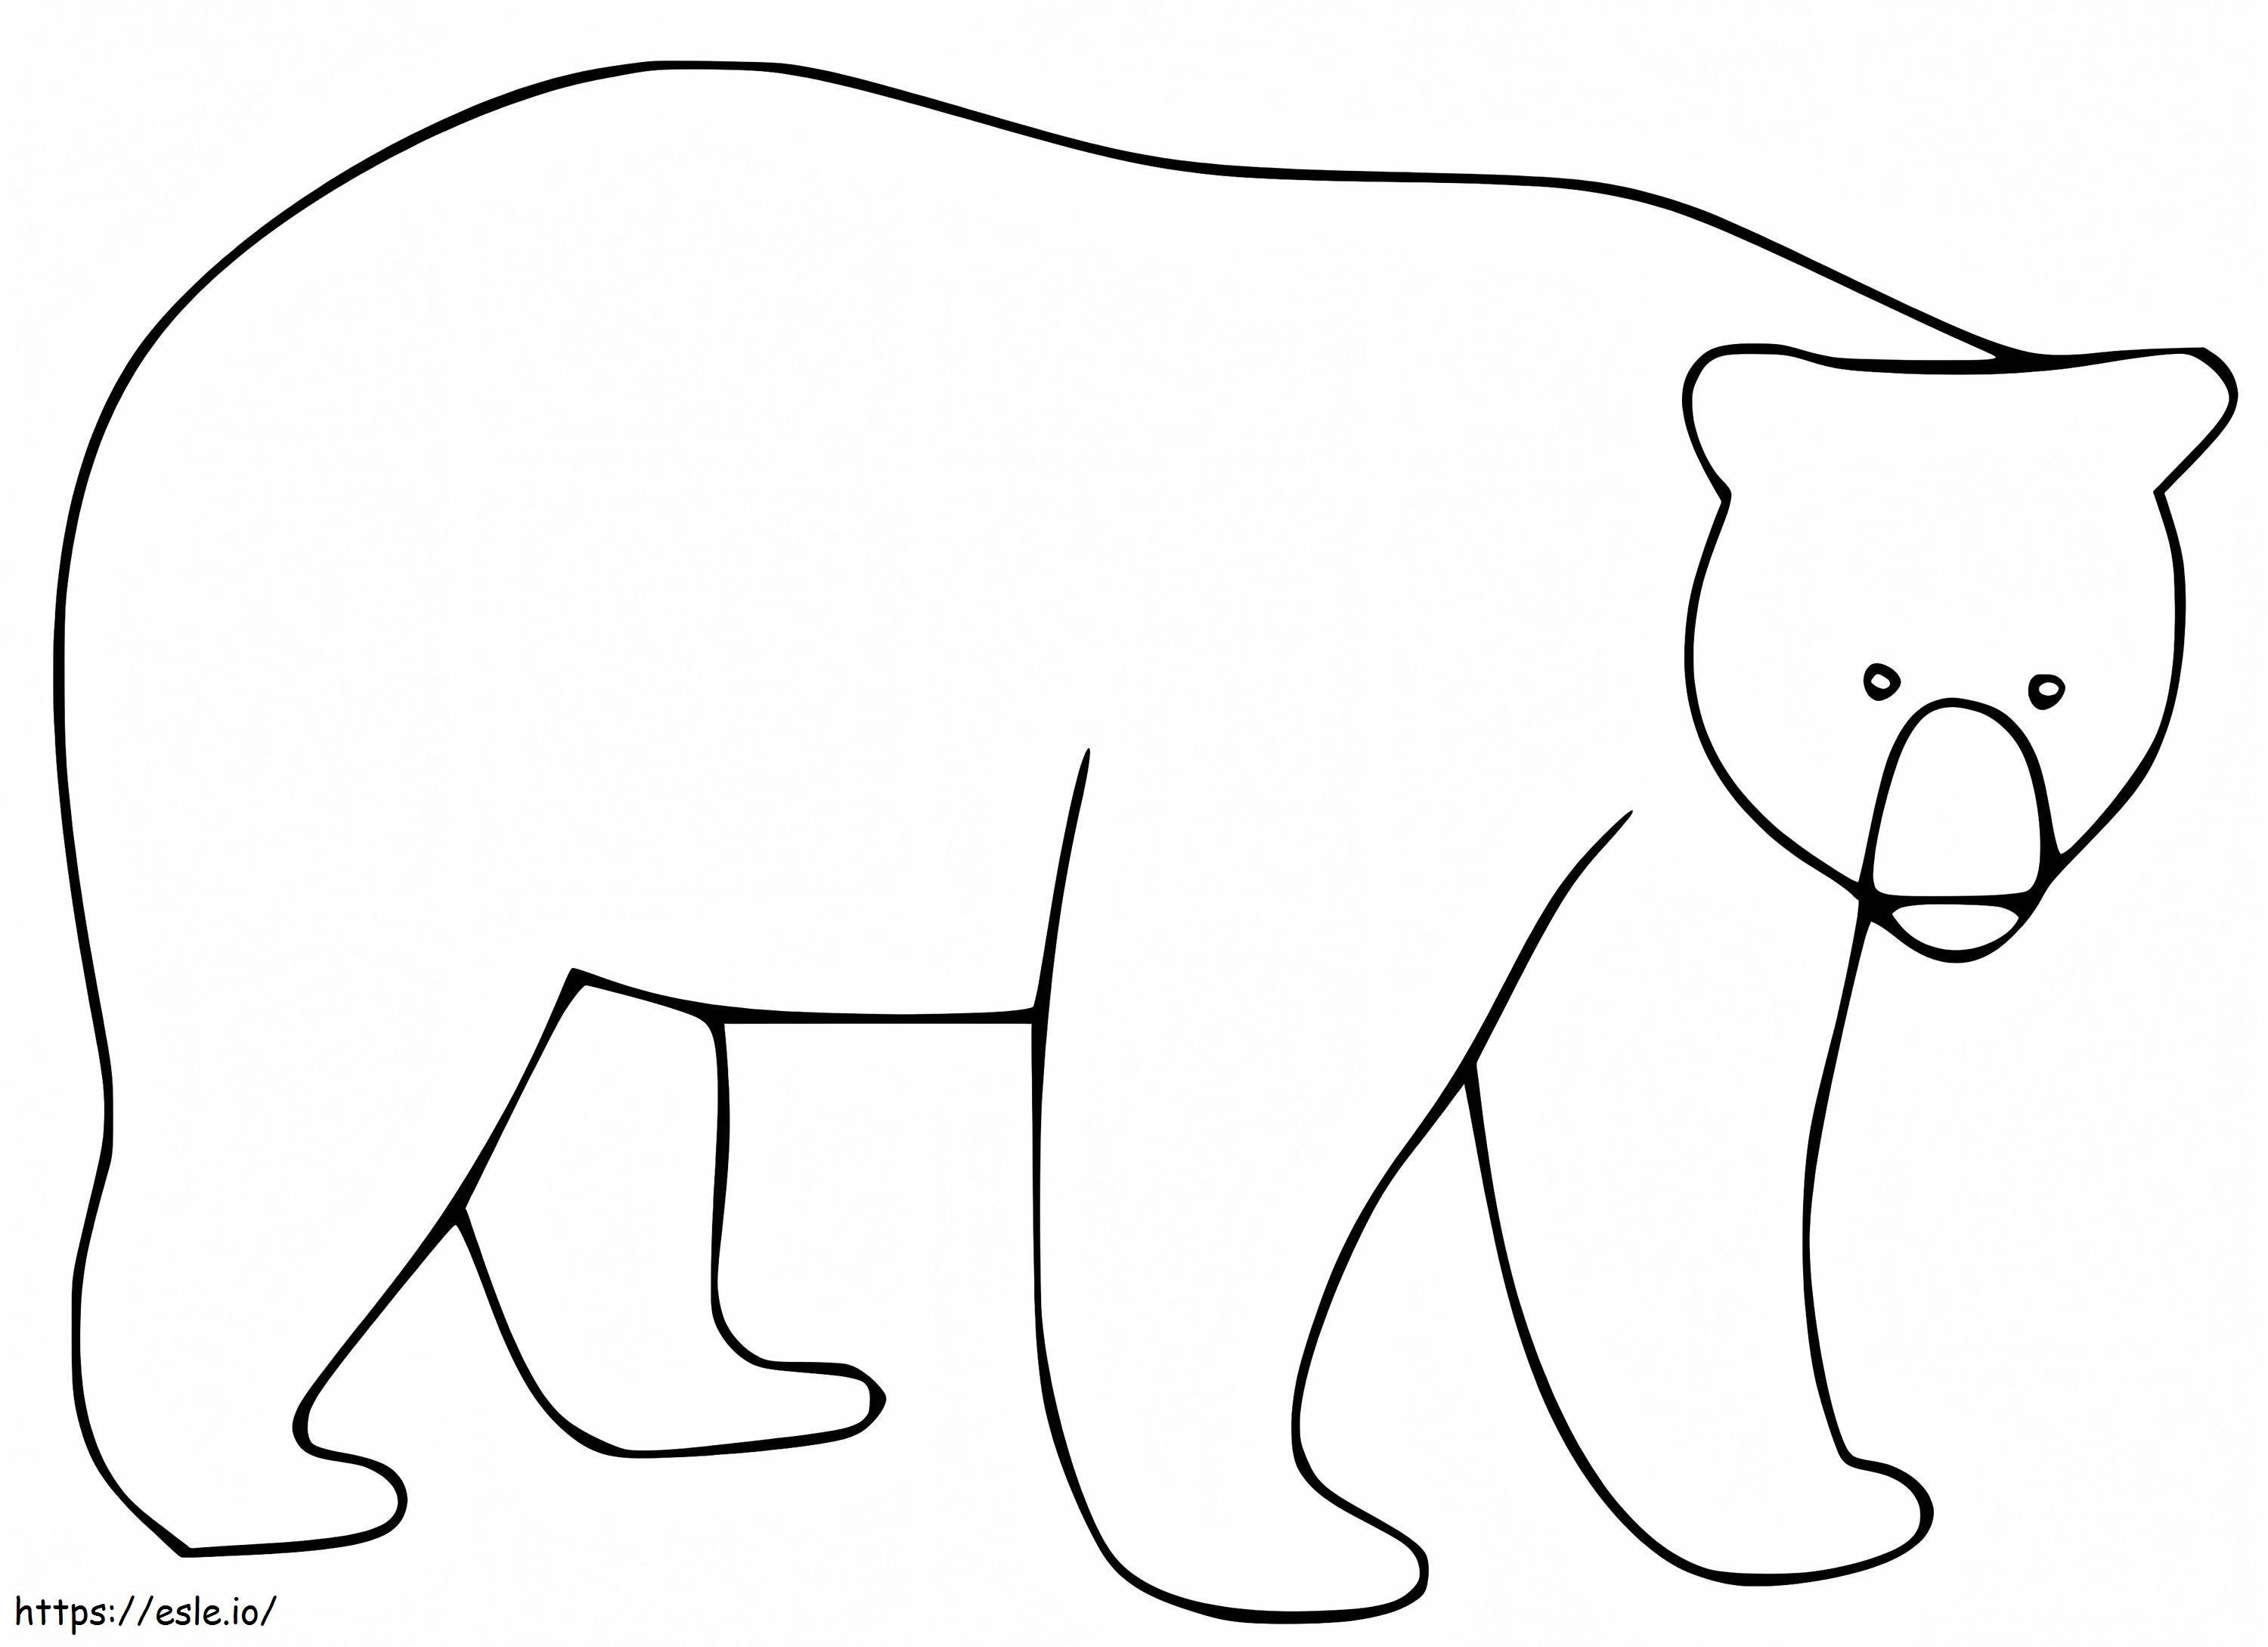 Simple Black Bear coloring page